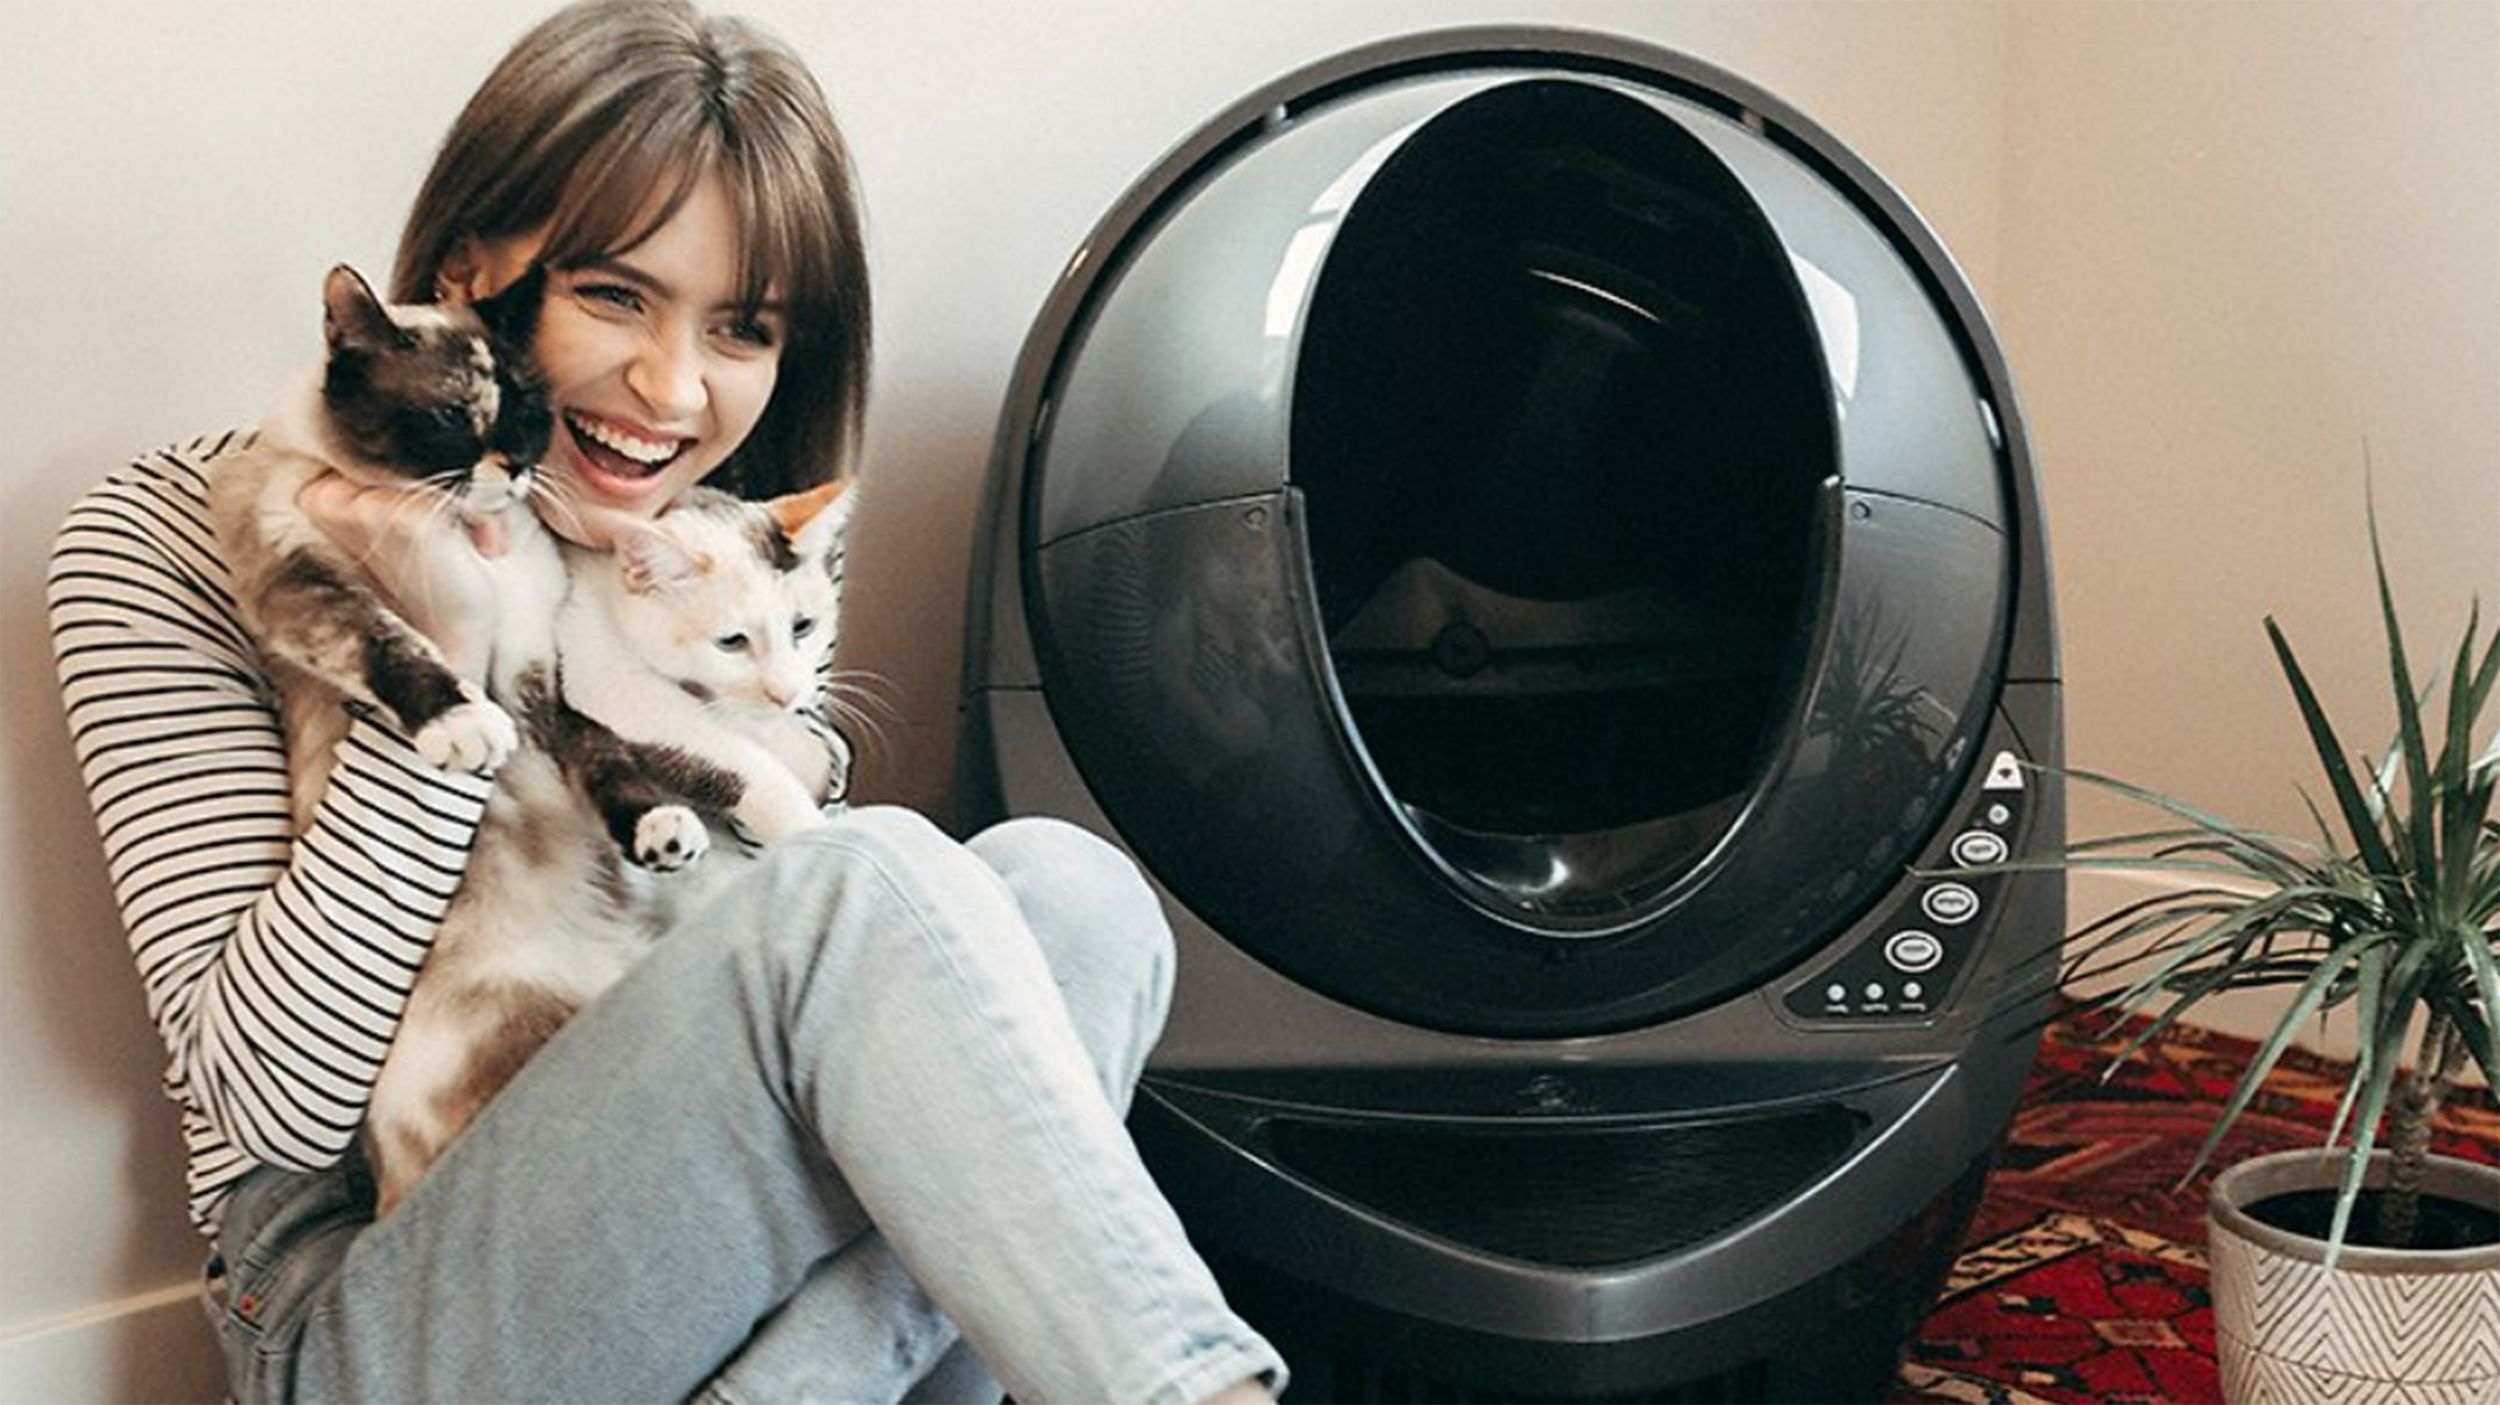 7 of the Best Cat Litter Boxes, According to Experts